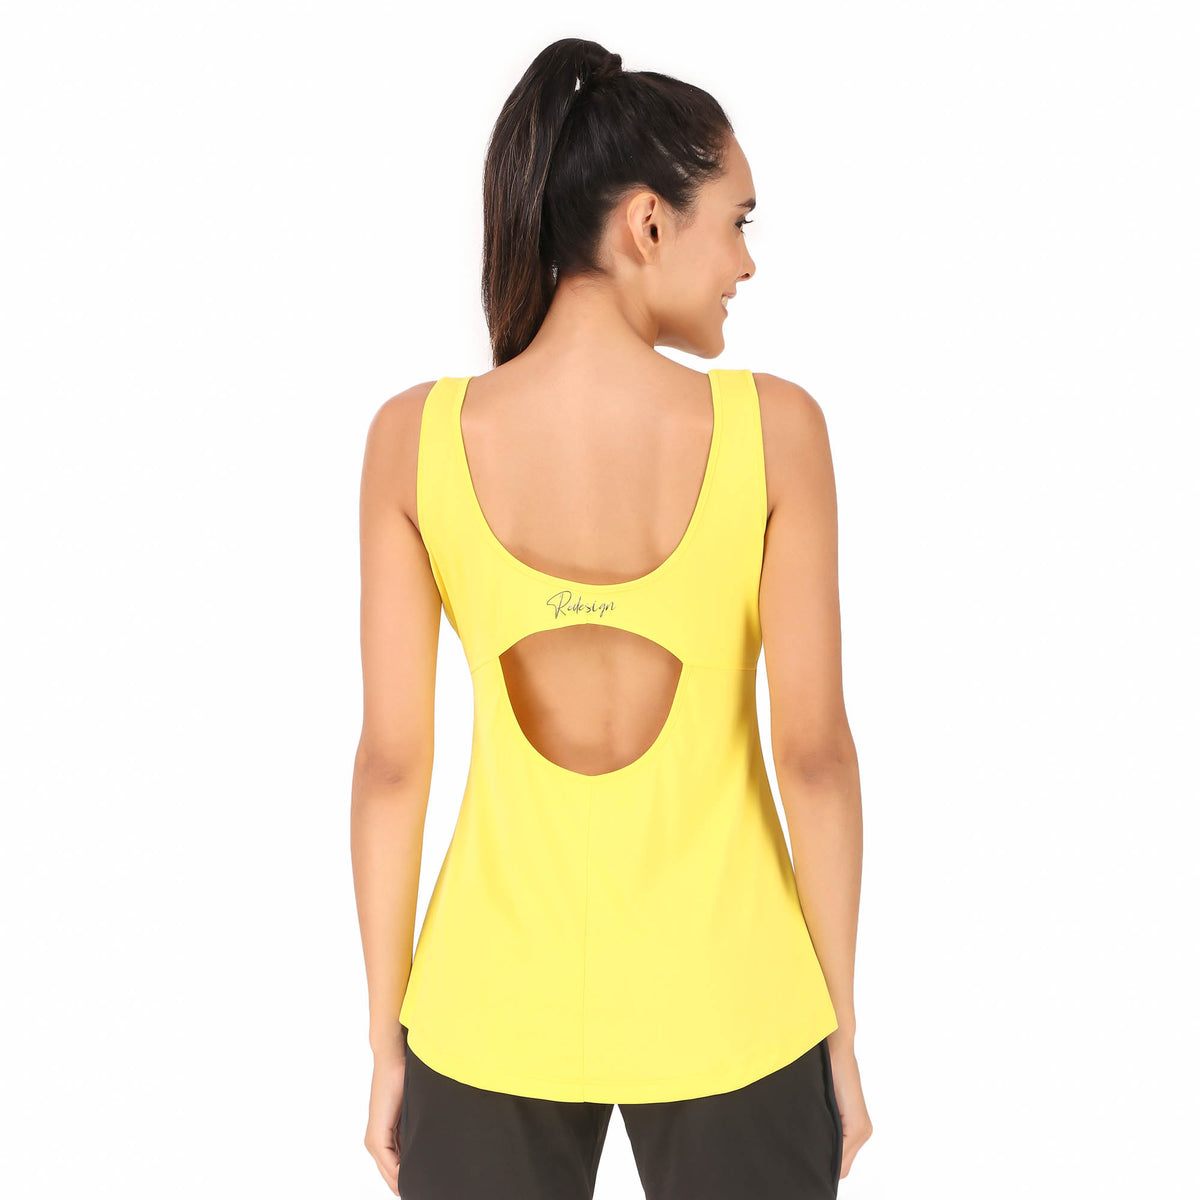 Back Cut-Out Sleeveless Tshirt For Women (Yellow)